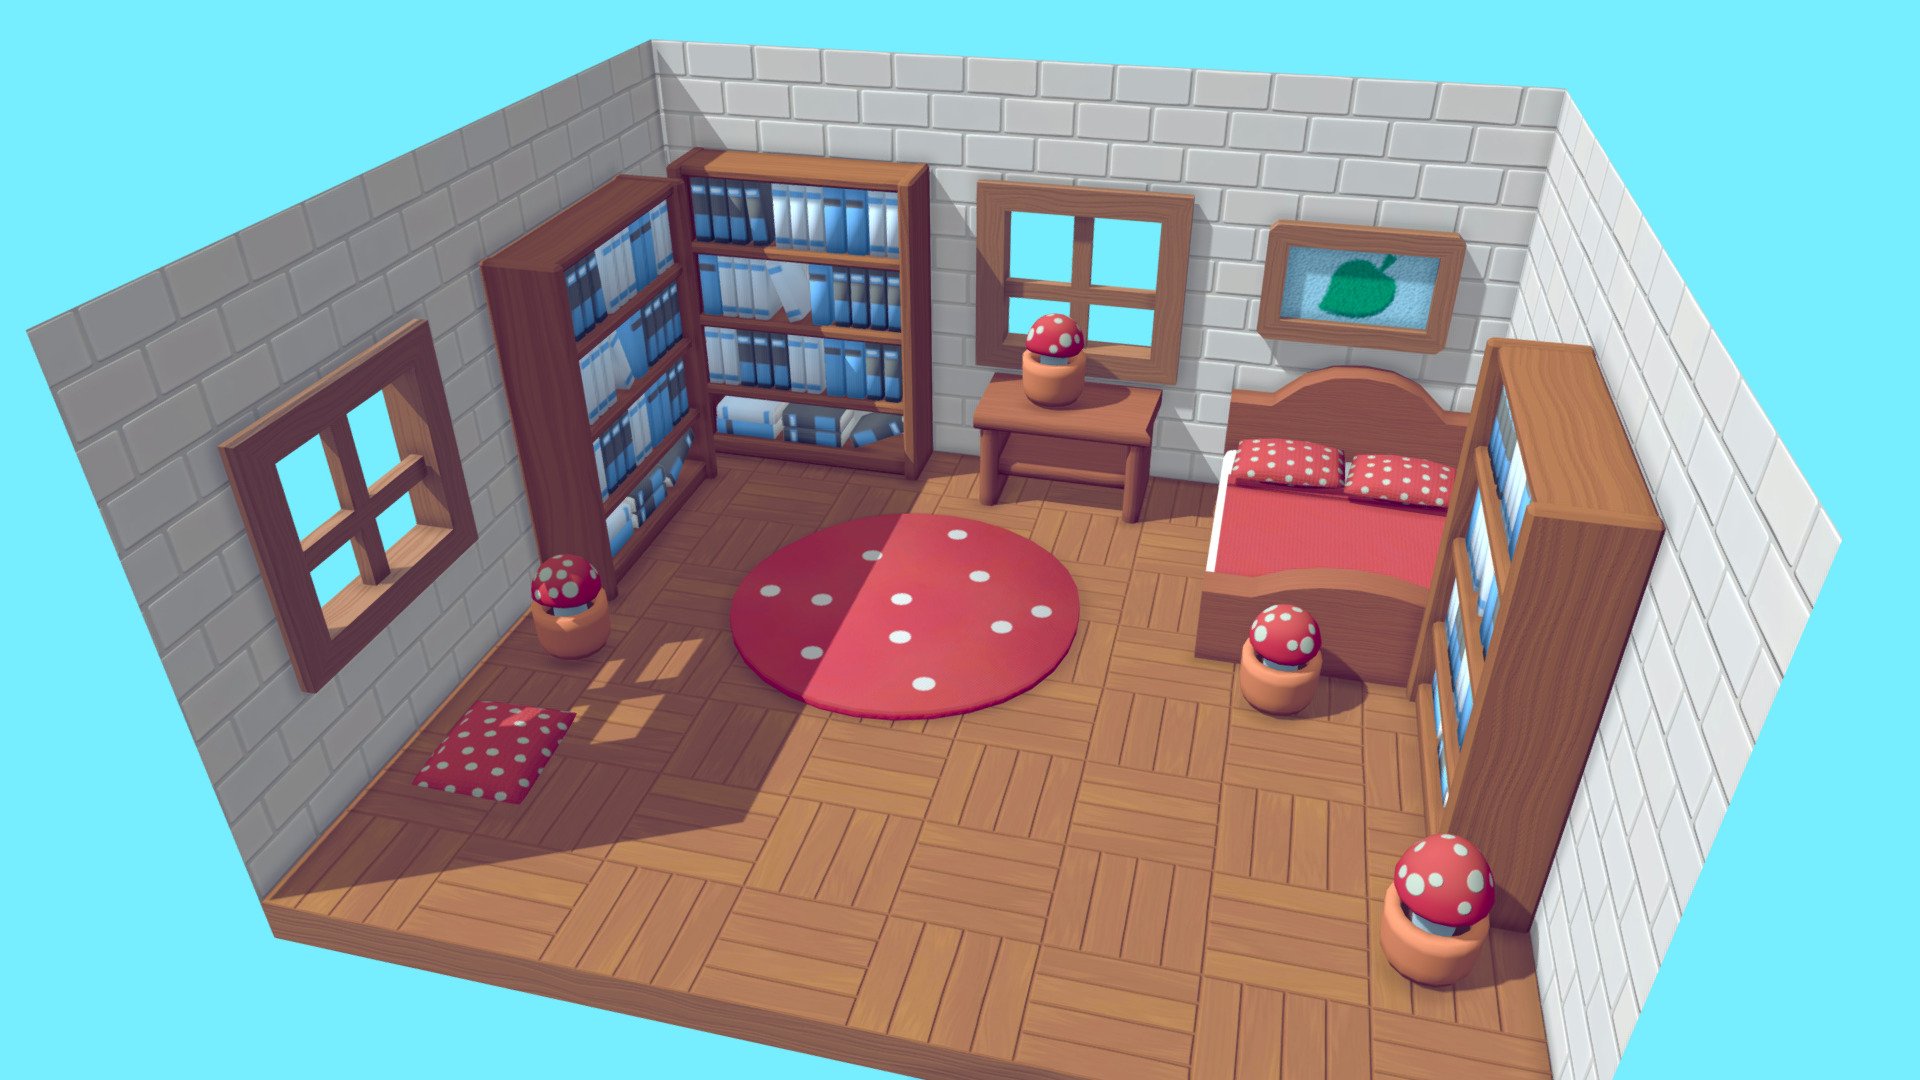 A cute lil room I made as a test project for a client - inspired by cottagecore a bit c: - Mushroom Room - 3D model by Rick Hoppmann (@tinyruin) 3d model